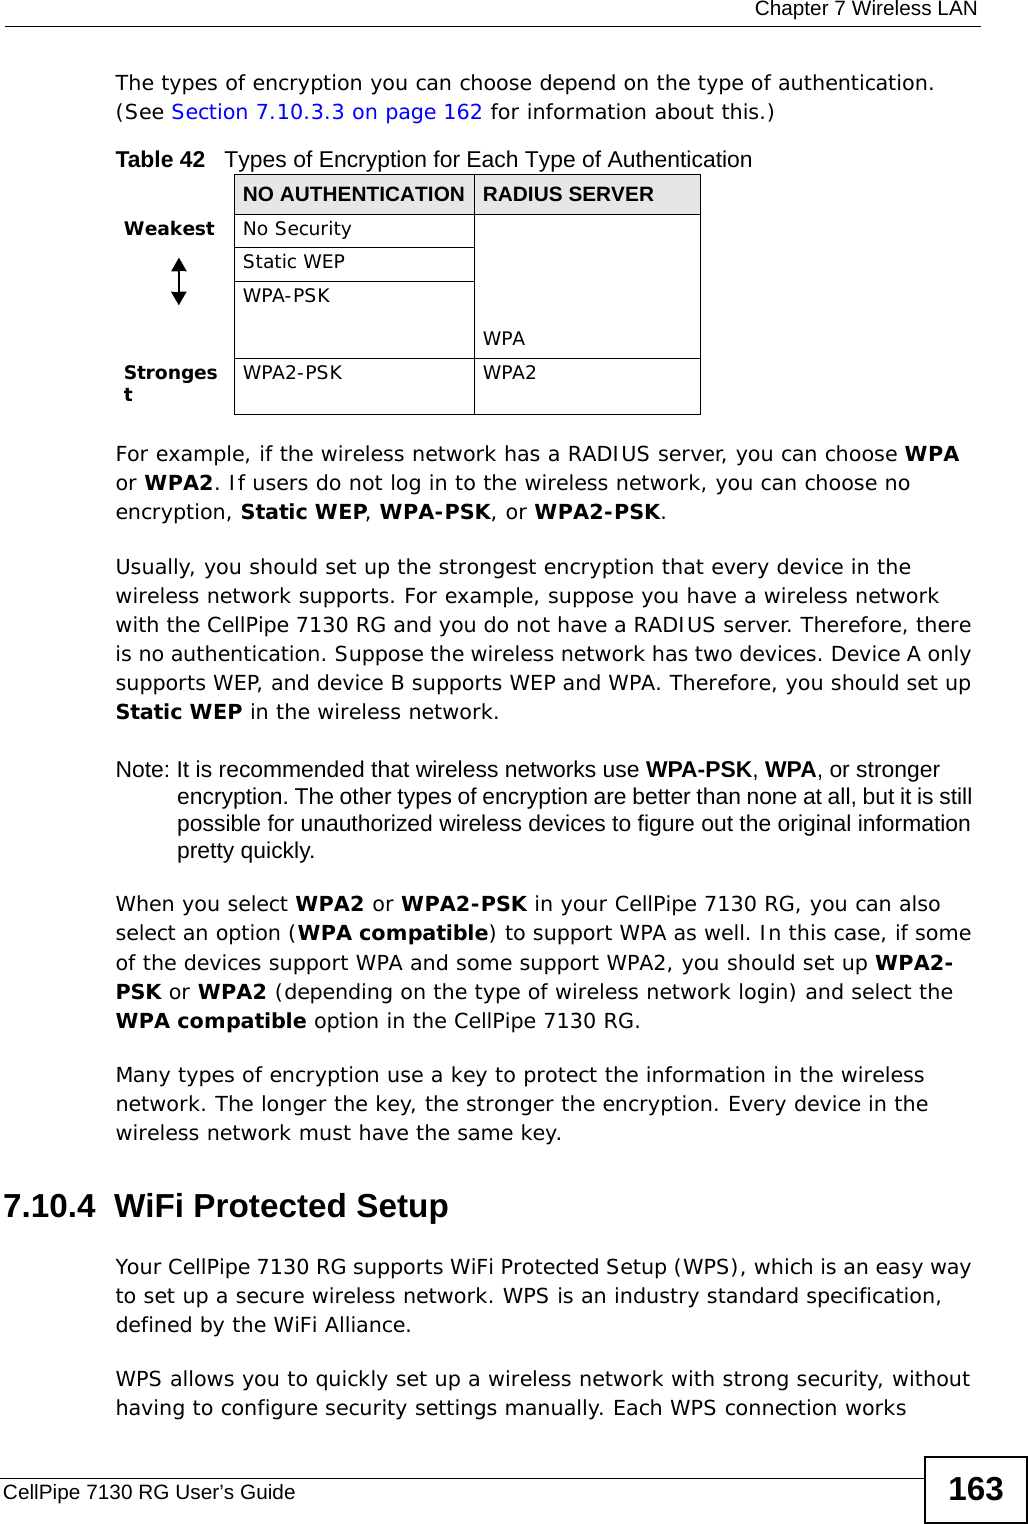  Chapter 7 Wireless LANCellPipe 7130 RG User’s Guide 163The types of encryption you can choose depend on the type of authentication. (See Section 7.10.3.3 on page 162 for information about this.)For example, if the wireless network has a RADIUS server, you can choose WPA or WPA2. If users do not log in to the wireless network, you can choose no encryption, Static WEP, WPA-PSK, or WPA2-PSK.Usually, you should set up the strongest encryption that every device in the wireless network supports. For example, suppose you have a wireless network with the CellPipe 7130 RG and you do not have a RADIUS server. Therefore, there is no authentication. Suppose the wireless network has two devices. Device A only supports WEP, and device B supports WEP and WPA. Therefore, you should set up Static WEP in the wireless network.Note: It is recommended that wireless networks use WPA-PSK, WPA, or stronger encryption. The other types of encryption are better than none at all, but it is still possible for unauthorized wireless devices to figure out the original information pretty quickly.When you select WPA2 or WPA2-PSK in your CellPipe 7130 RG, you can also select an option (WPA compatible) to support WPA as well. In this case, if some of the devices support WPA and some support WPA2, you should set up WPA2-PSK or WPA2 (depending on the type of wireless network login) and select the WPA compatible option in the CellPipe 7130 RG.Many types of encryption use a key to protect the information in the wireless network. The longer the key, the stronger the encryption. Every device in the wireless network must have the same key.7.10.4  WiFi Protected SetupYour CellPipe 7130 RG supports WiFi Protected Setup (WPS), which is an easy way to set up a secure wireless network. WPS is an industry standard specification, defined by the WiFi Alliance.WPS allows you to quickly set up a wireless network with strong security, without having to configure security settings manually. Each WPS connection works Table 42   Types of Encryption for Each Type of AuthenticationNO AUTHENTICATION RADIUS SERVERWeakest No SecurityWPAStatic WEPWPA-PSKStrongestWPA2-PSK WPA2